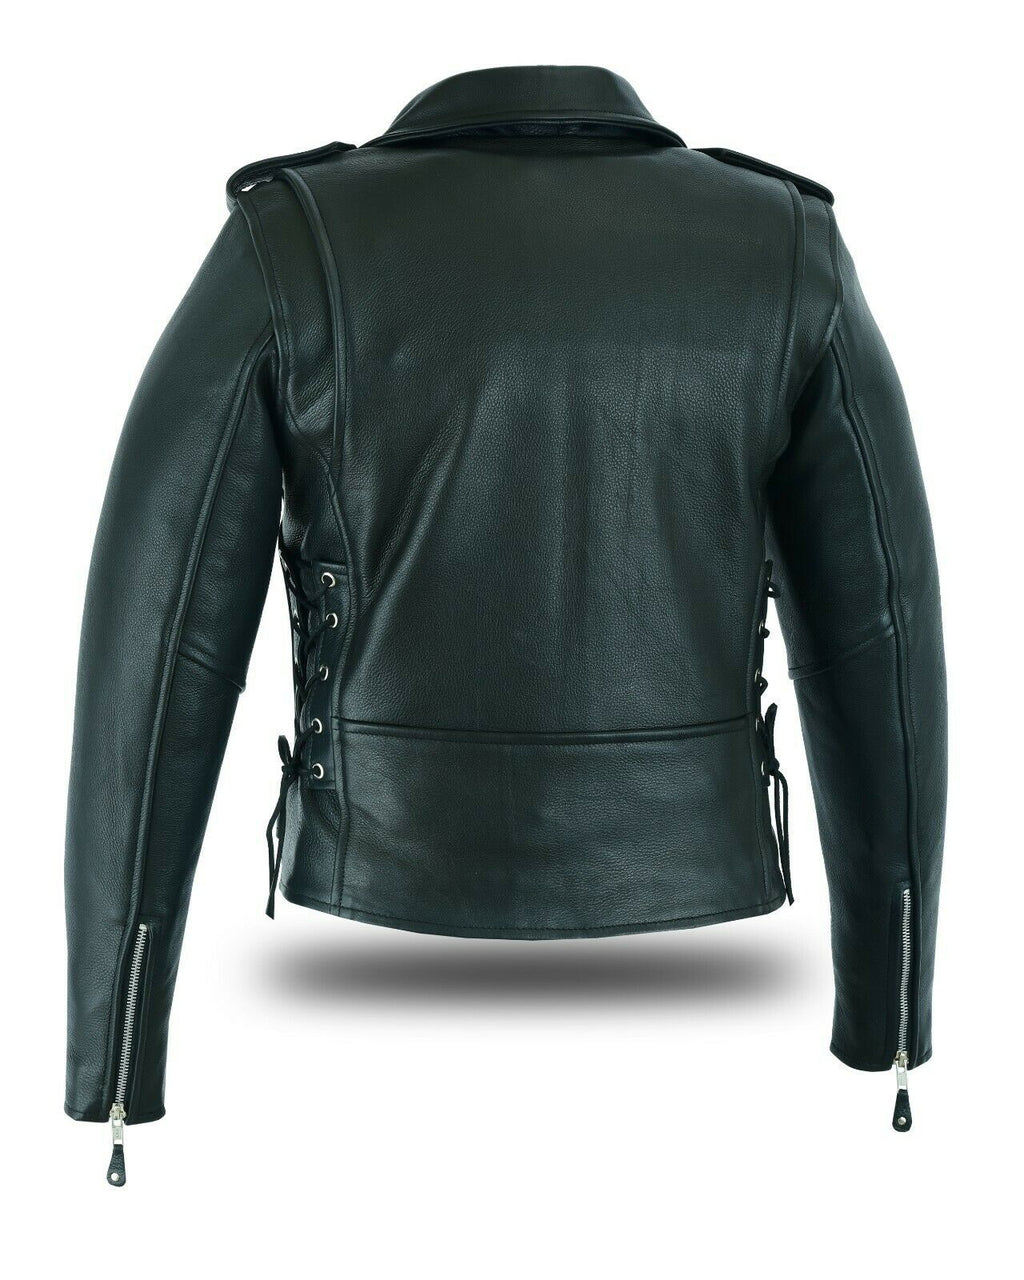 Womens Full Length Motorcycle Jacket With Side Lace Highwayleather 2087